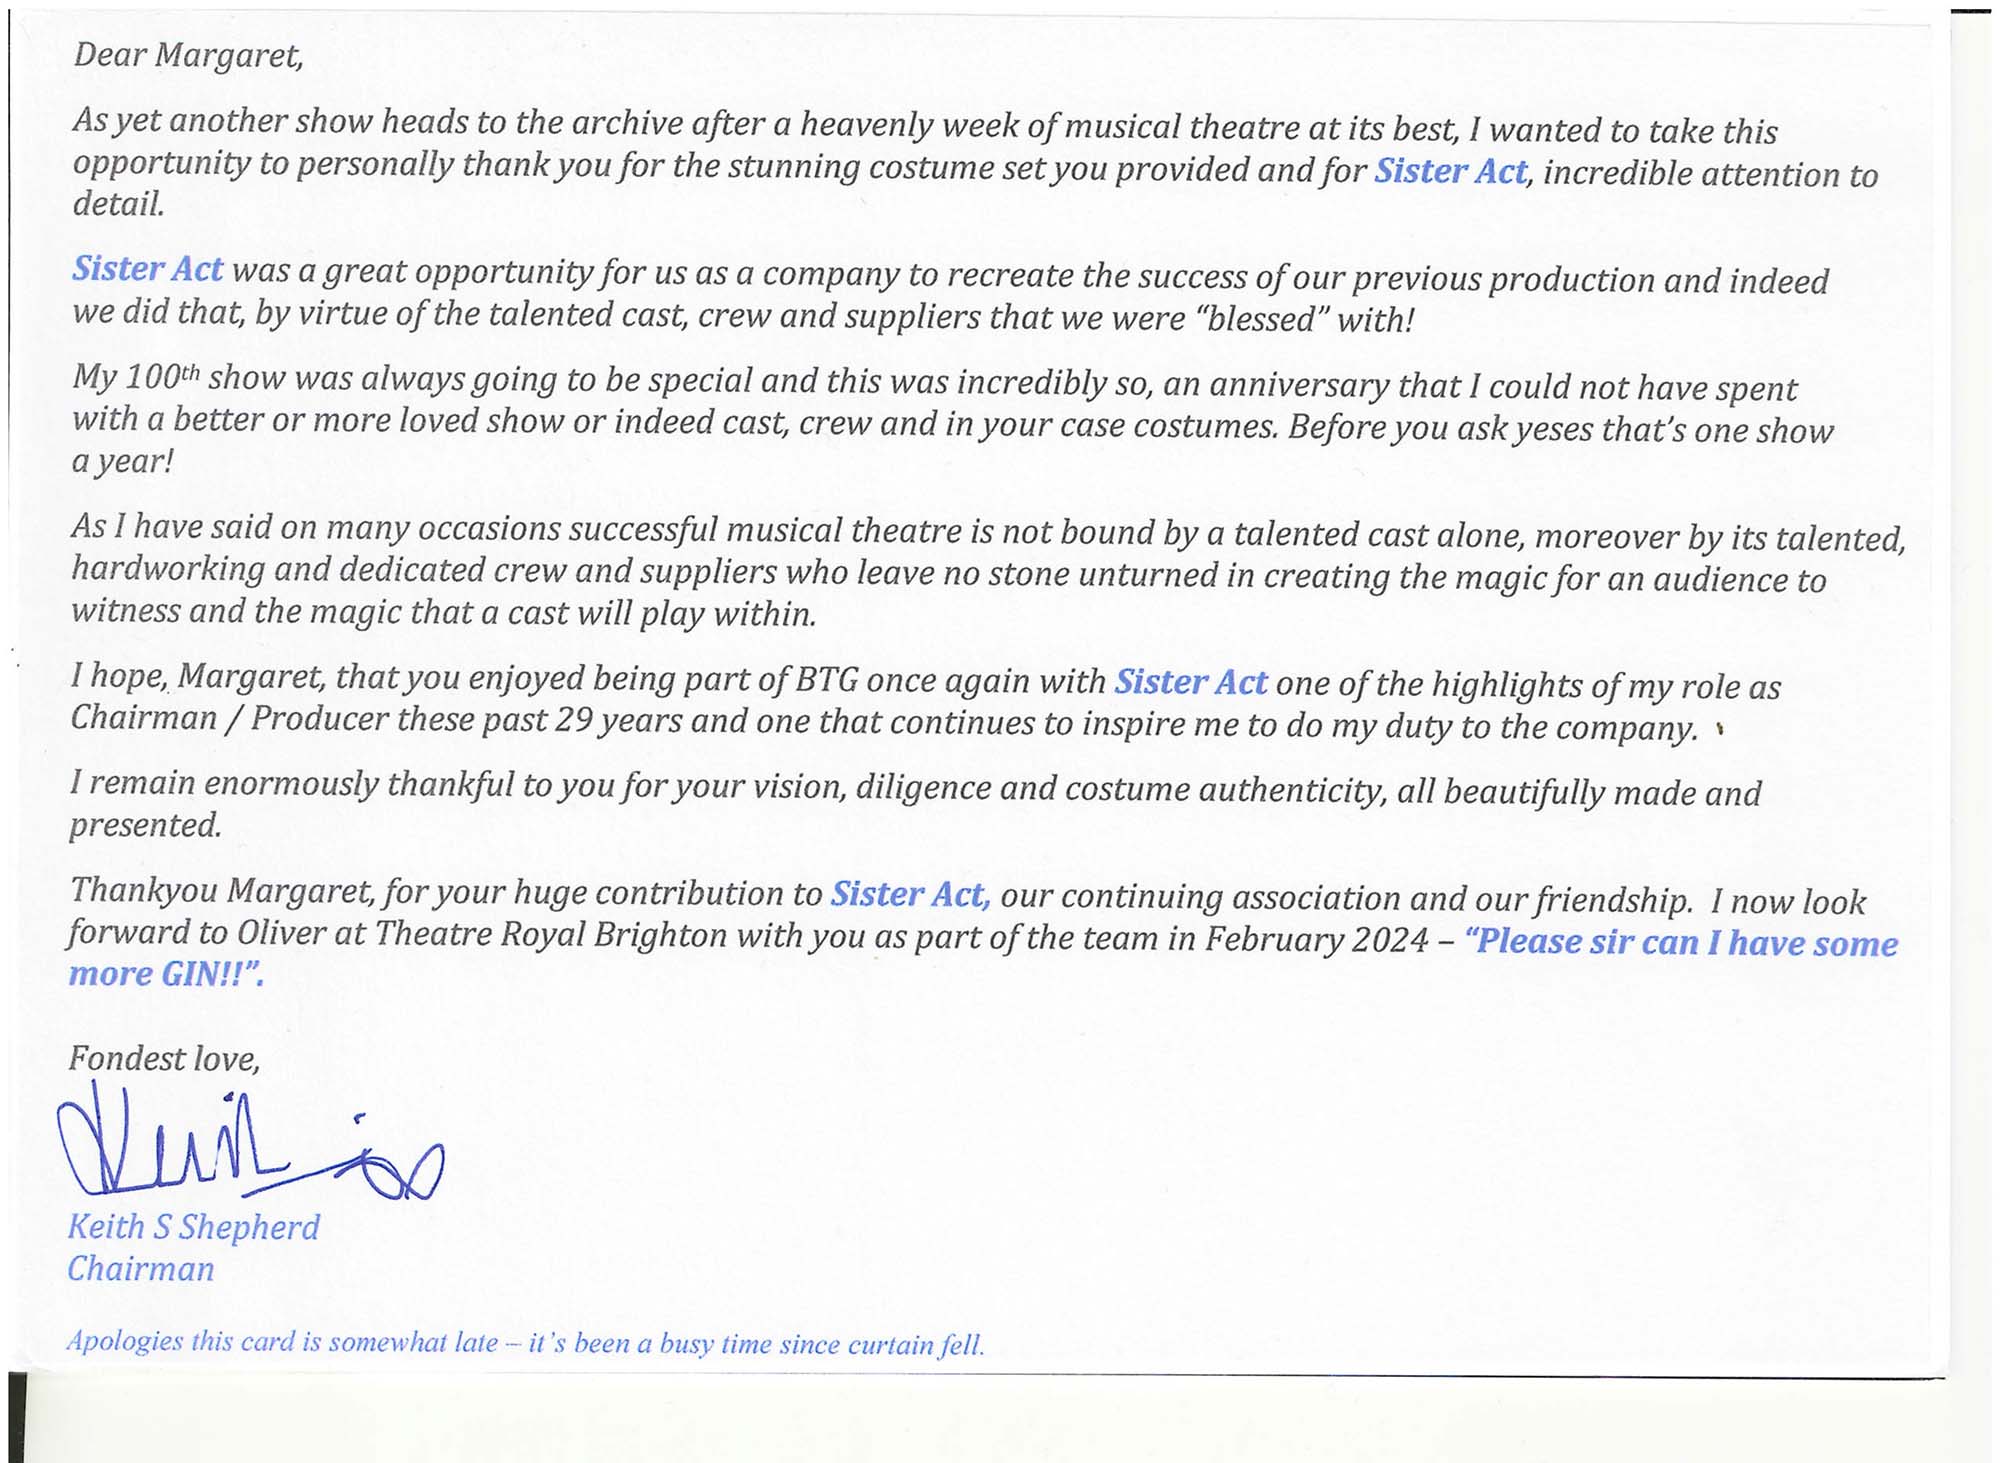 Thank you letter from chairman of Brighton Theatre Group 